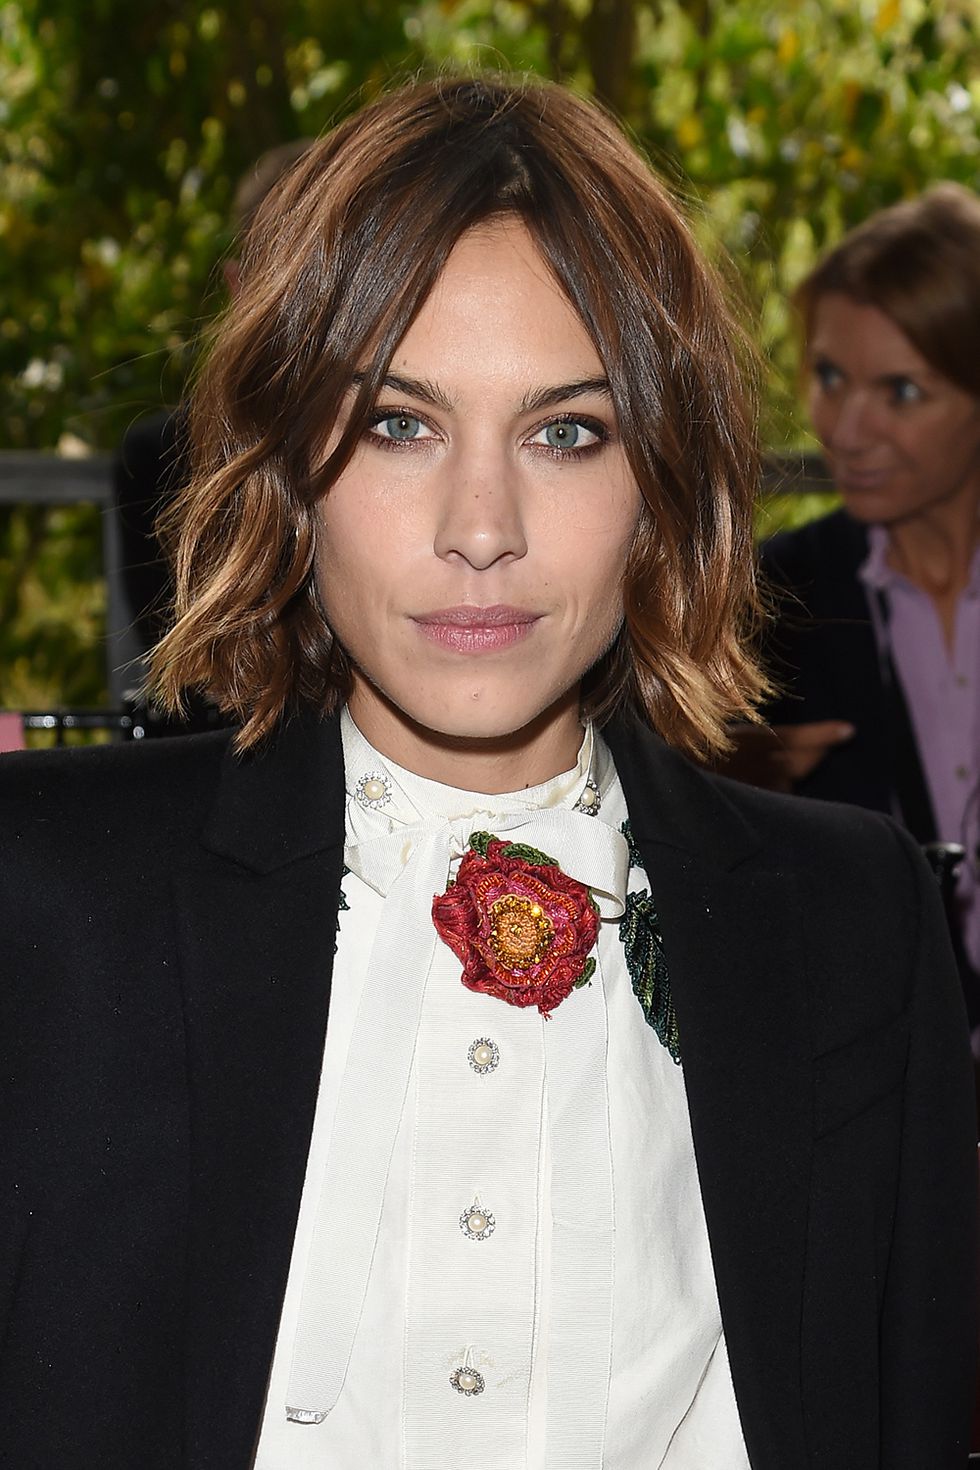 62 Bob Hairstyles That'll Convince You To Go For The Chop ...